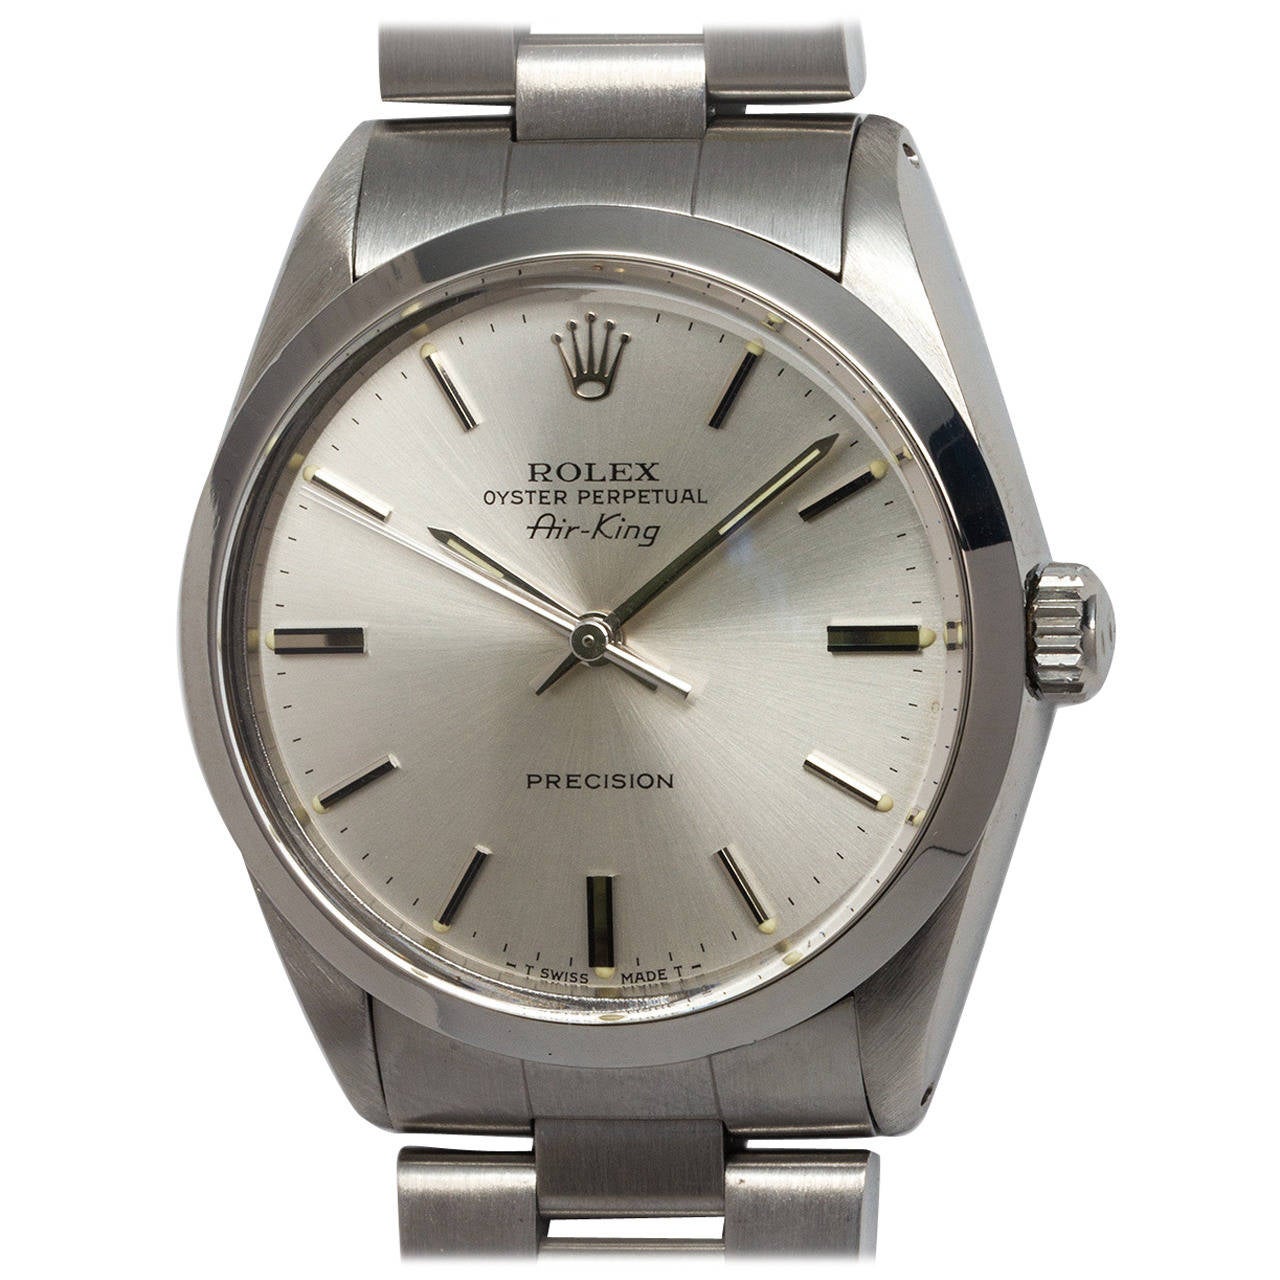 Rolex Stainless Steel Oyster Perpetual Airking Wristwatch Ref 5500